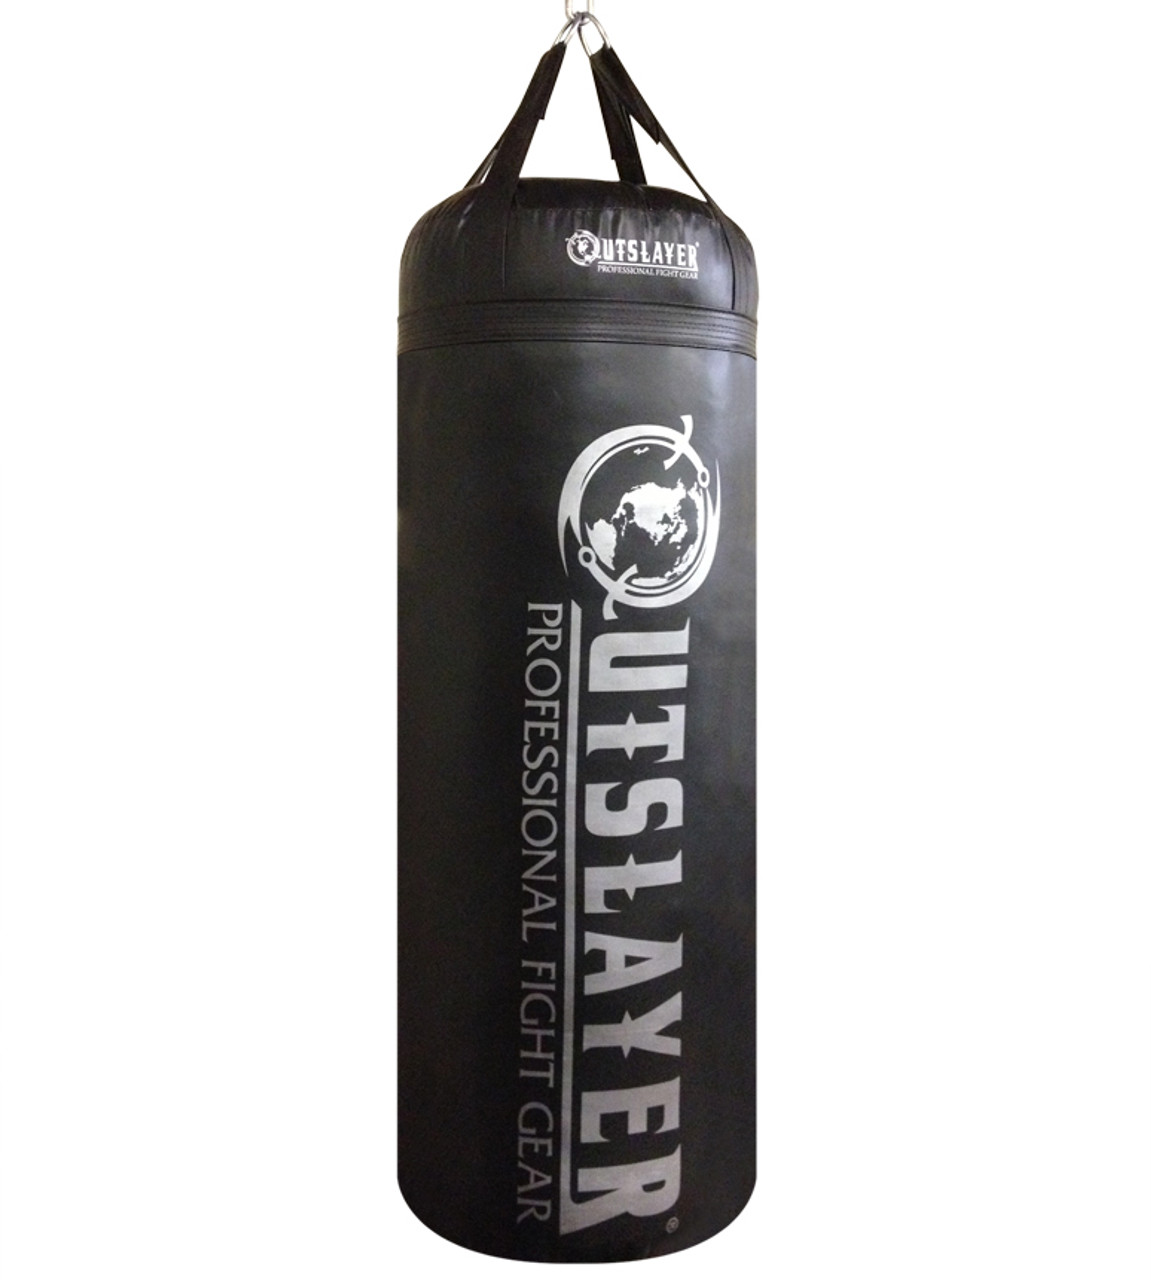 Outslayer Boxing MMA 100lbs Heavy Bag Filled